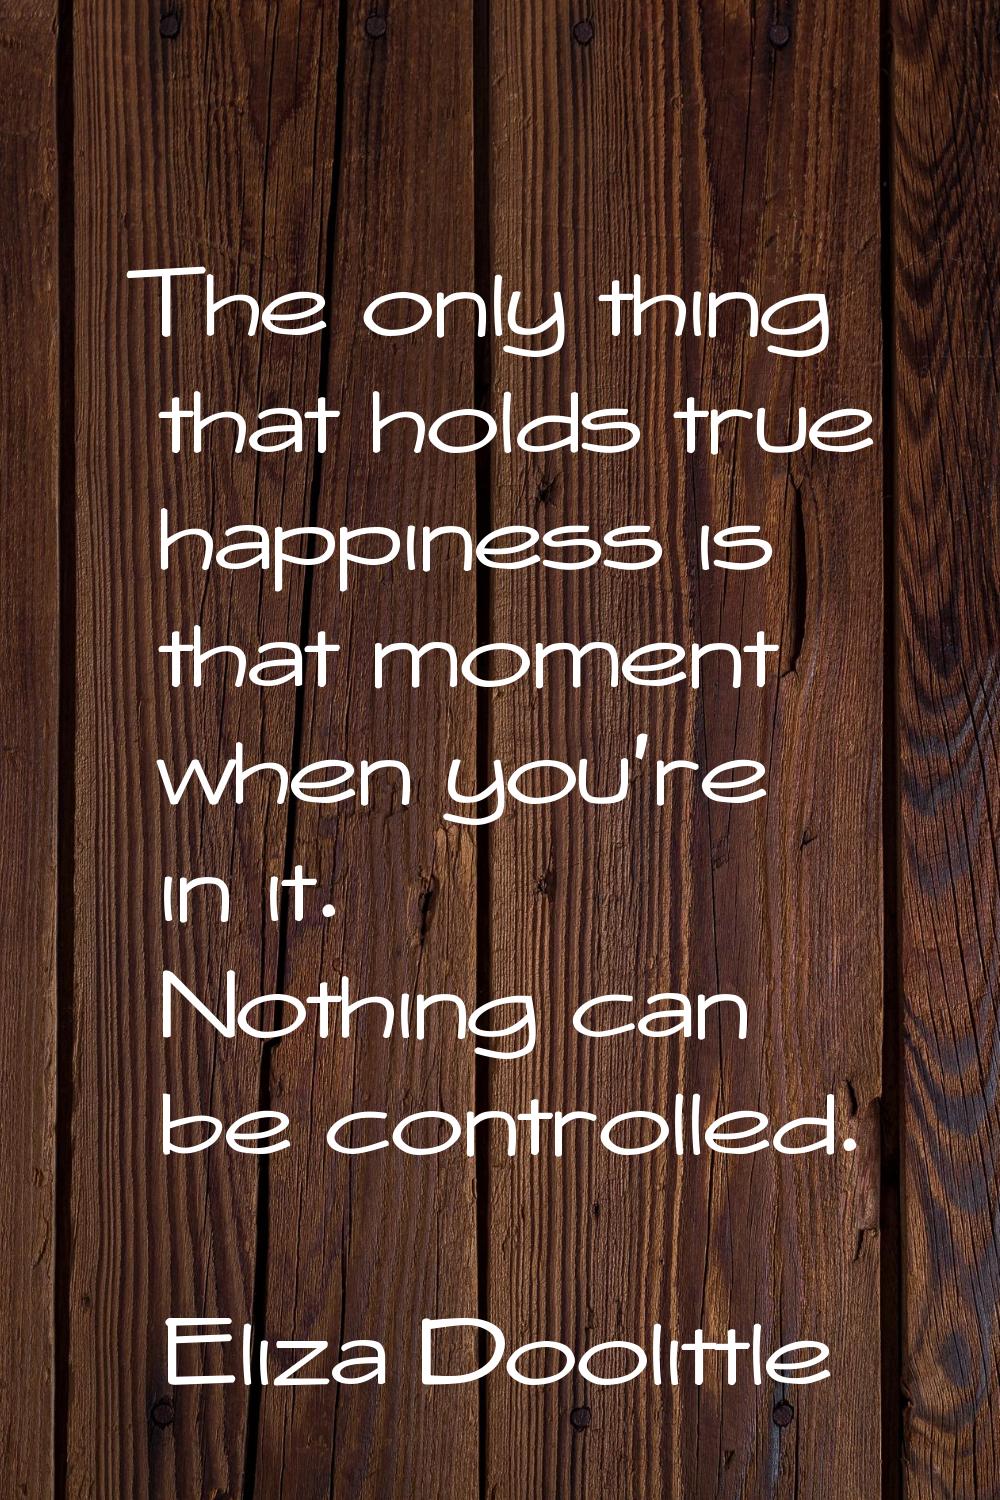 The only thing that holds true happiness is that moment when you're in it. Nothing can be controlle